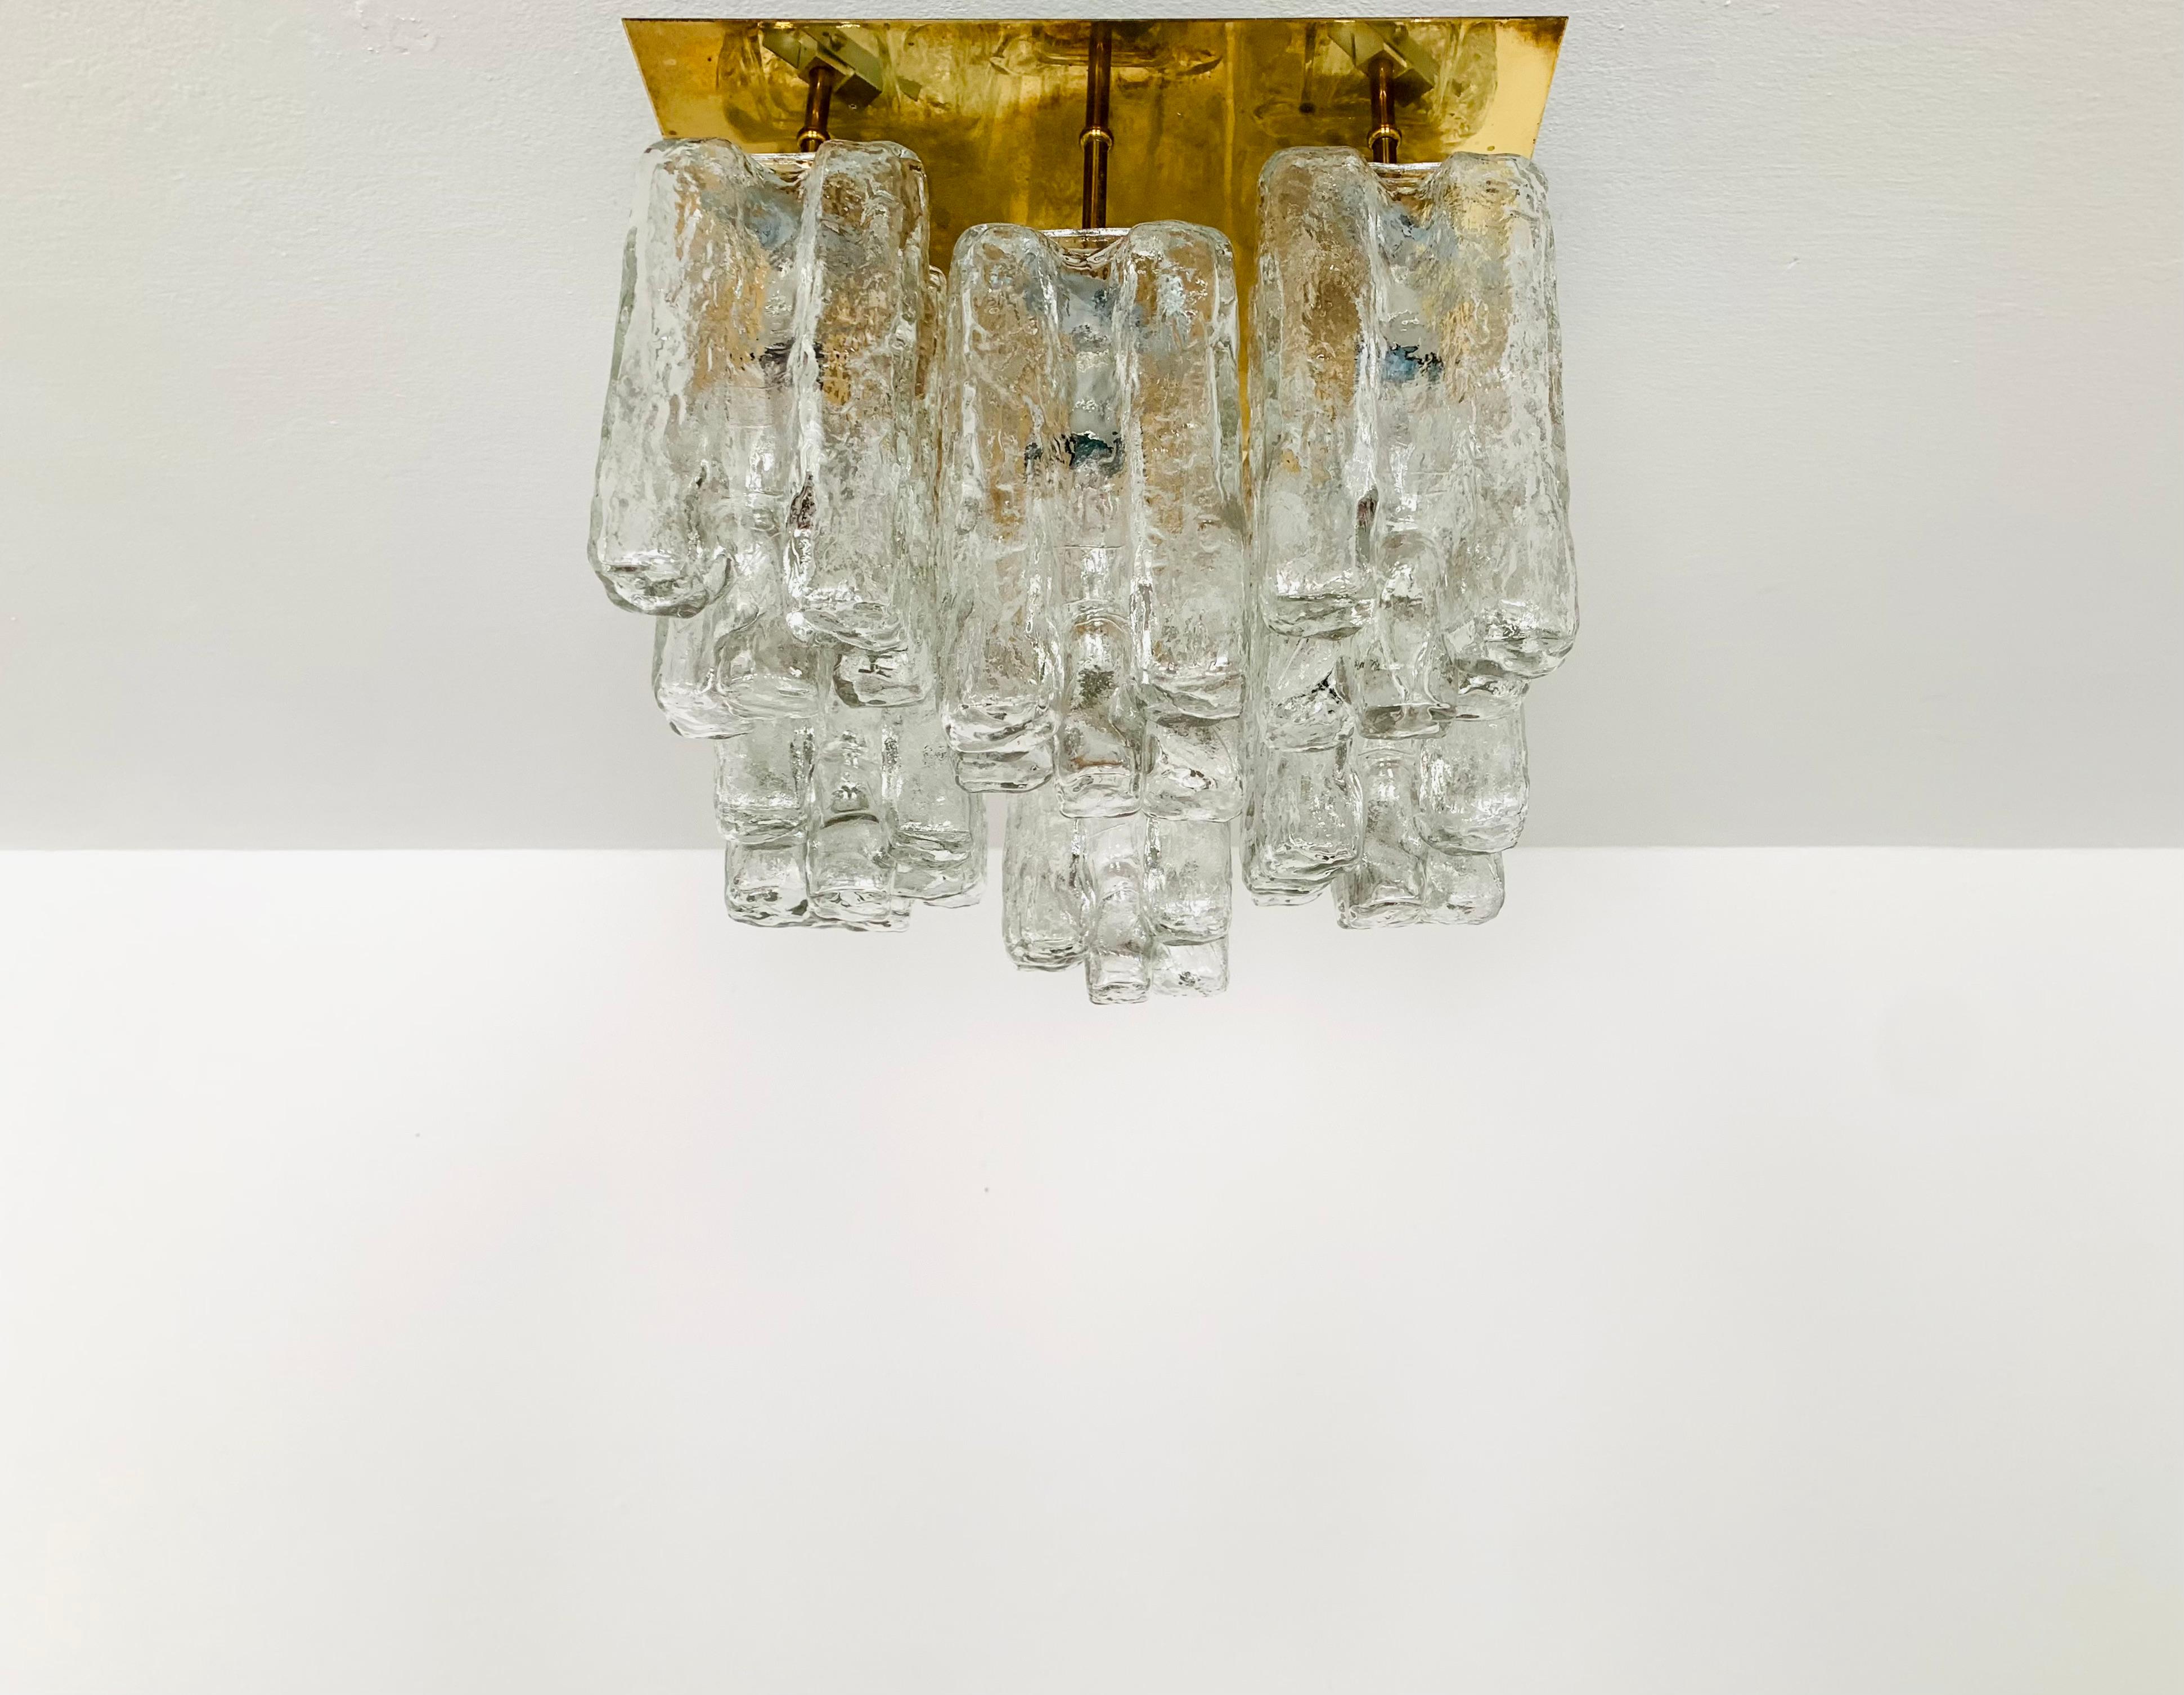 Wonderful ice glass ceiling lamp from the 1960s.
The 8 beautifully shaped Murano glass elements create an impressive, sparkling play of light.
Very high-quality workmanship and a real eye-catcher for every home.

Design: J.T. Kalmar
Manufacturer: